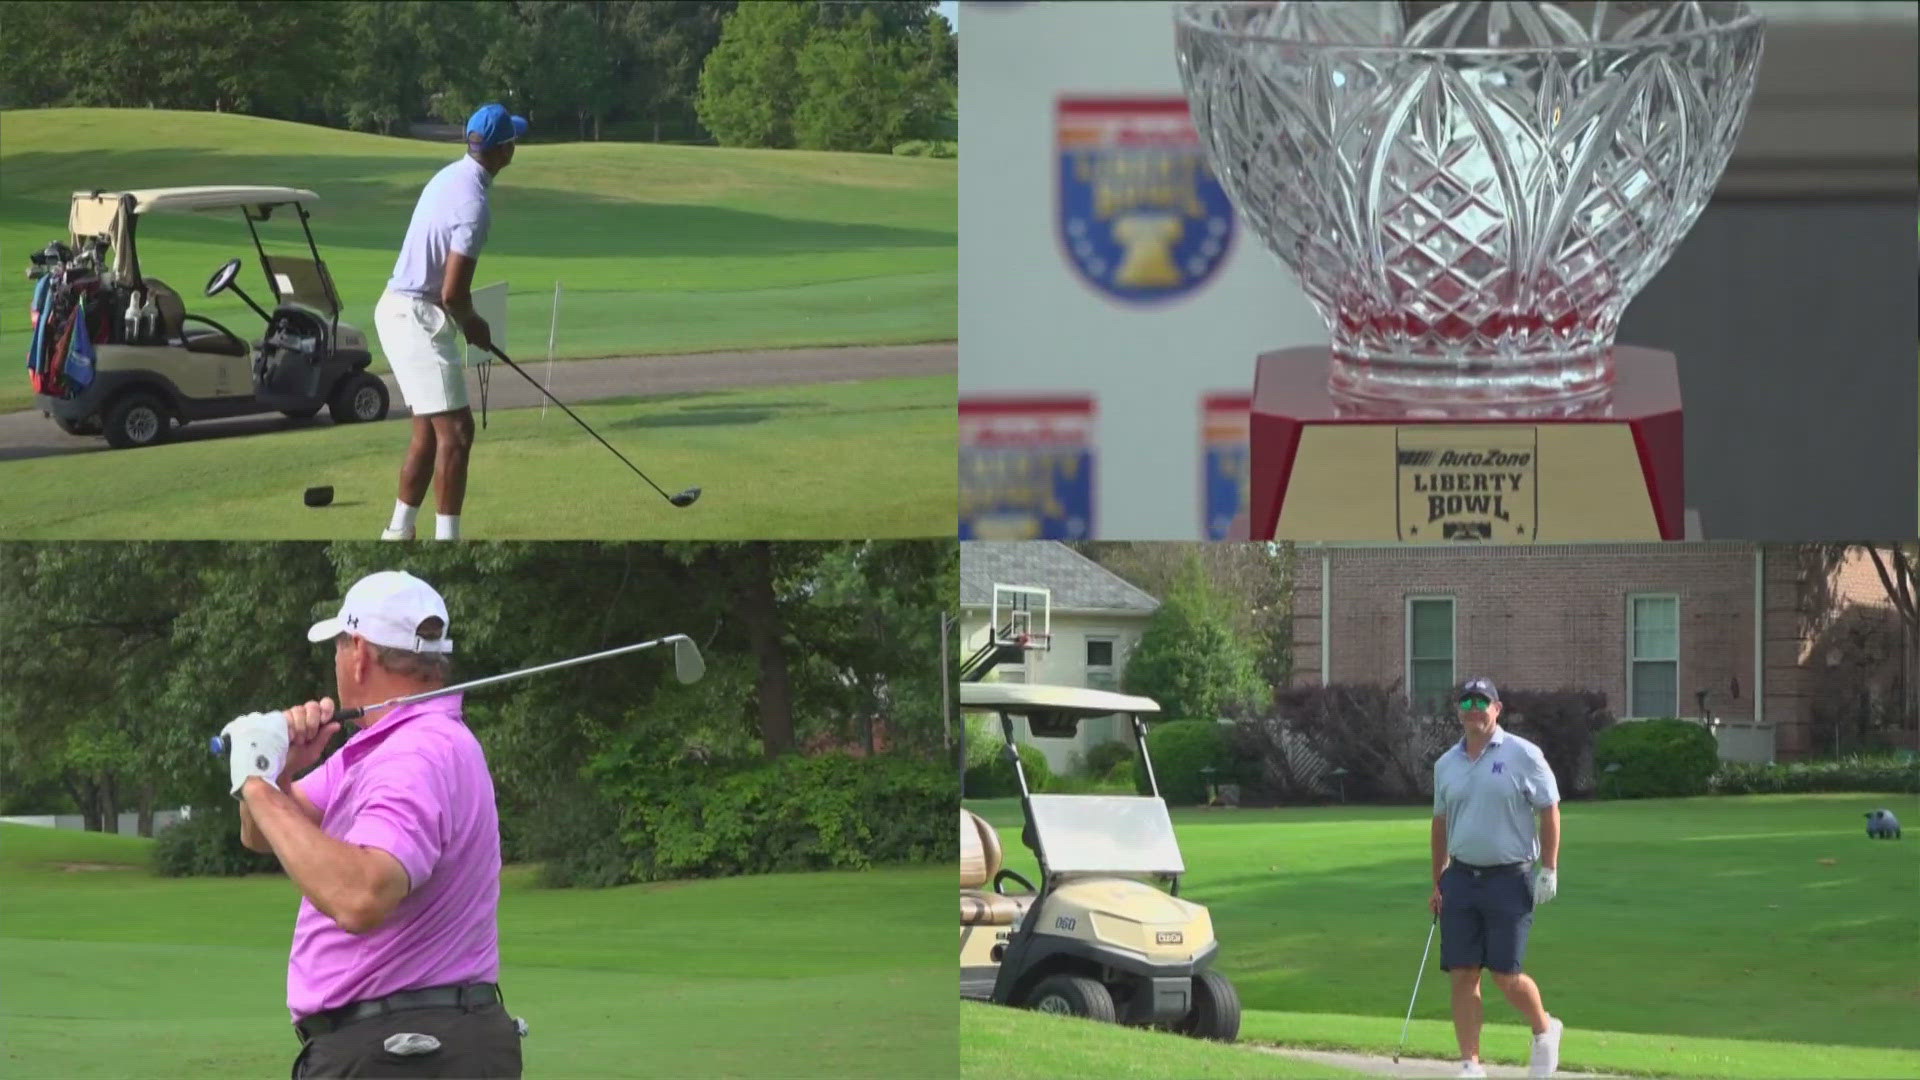 Benefitting St. Jude, big names like Penny Hardaway, Ryan Silverfield and more were all on tap at the "Golf Classic."